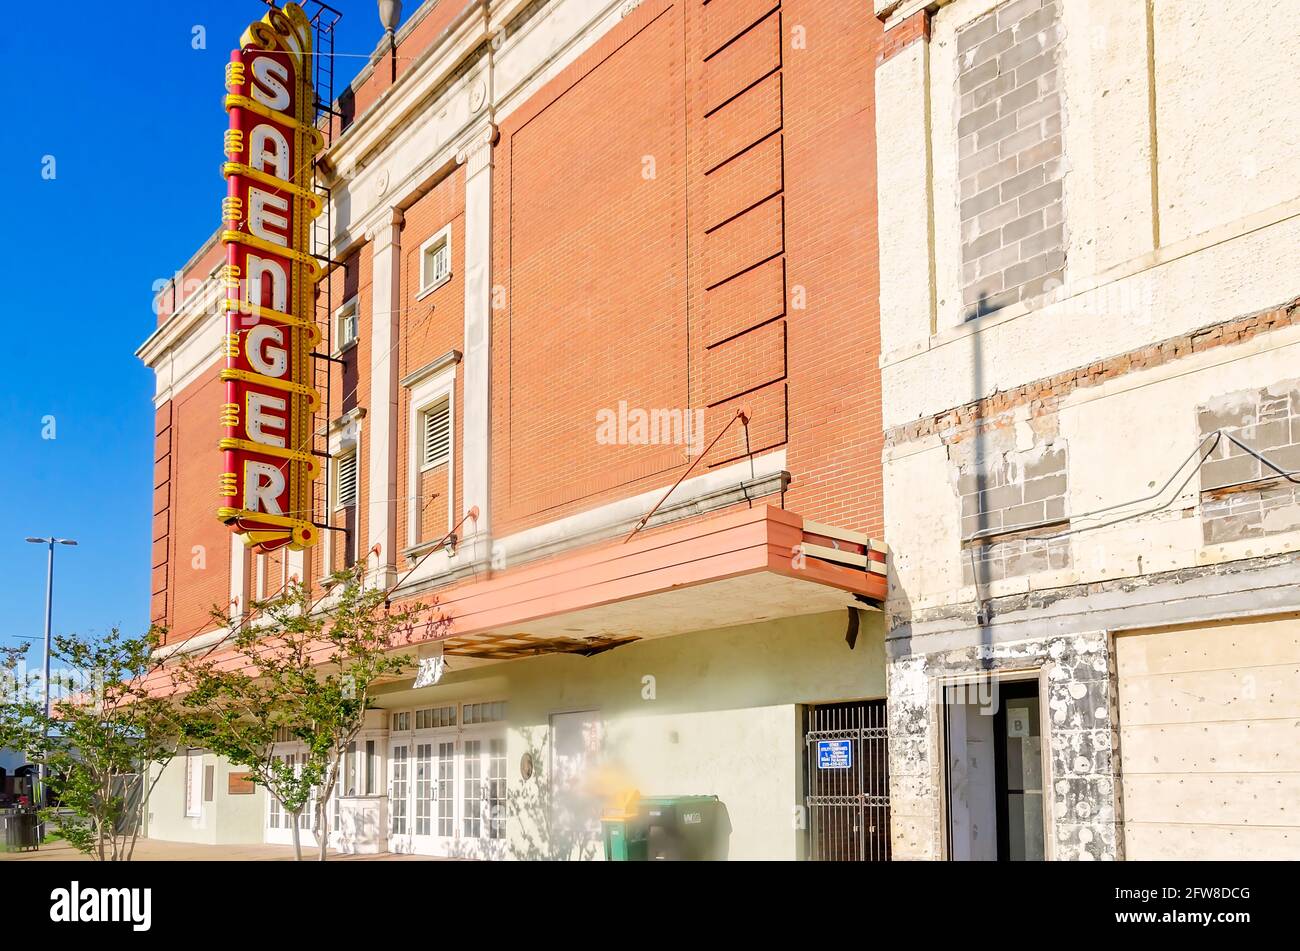 The Saenger Theatre is pictured, May 8, 2021, in Biloxi, Mississippi. The theatre was built in 1928 in the New Classical Revival architectural style . Stock Photo